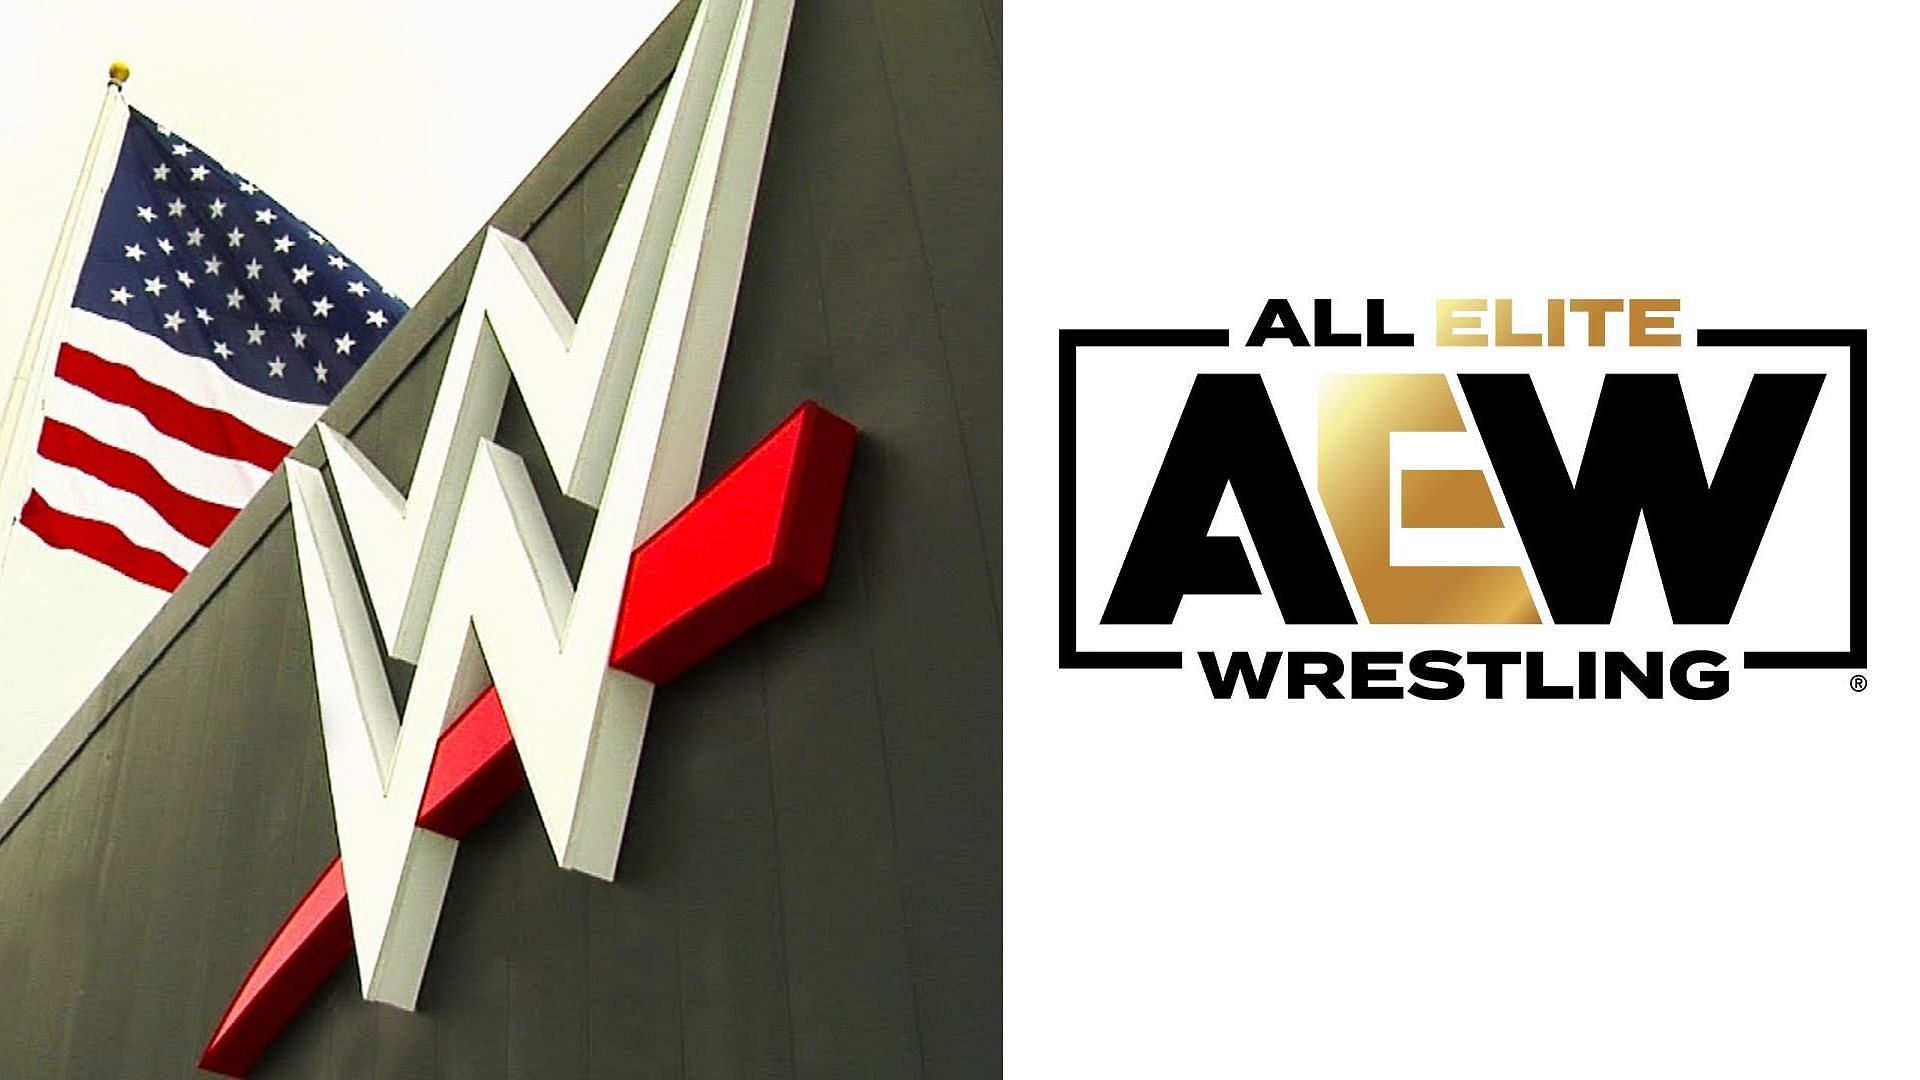 WWE &amp; AEW have been going head-to-head since 2019